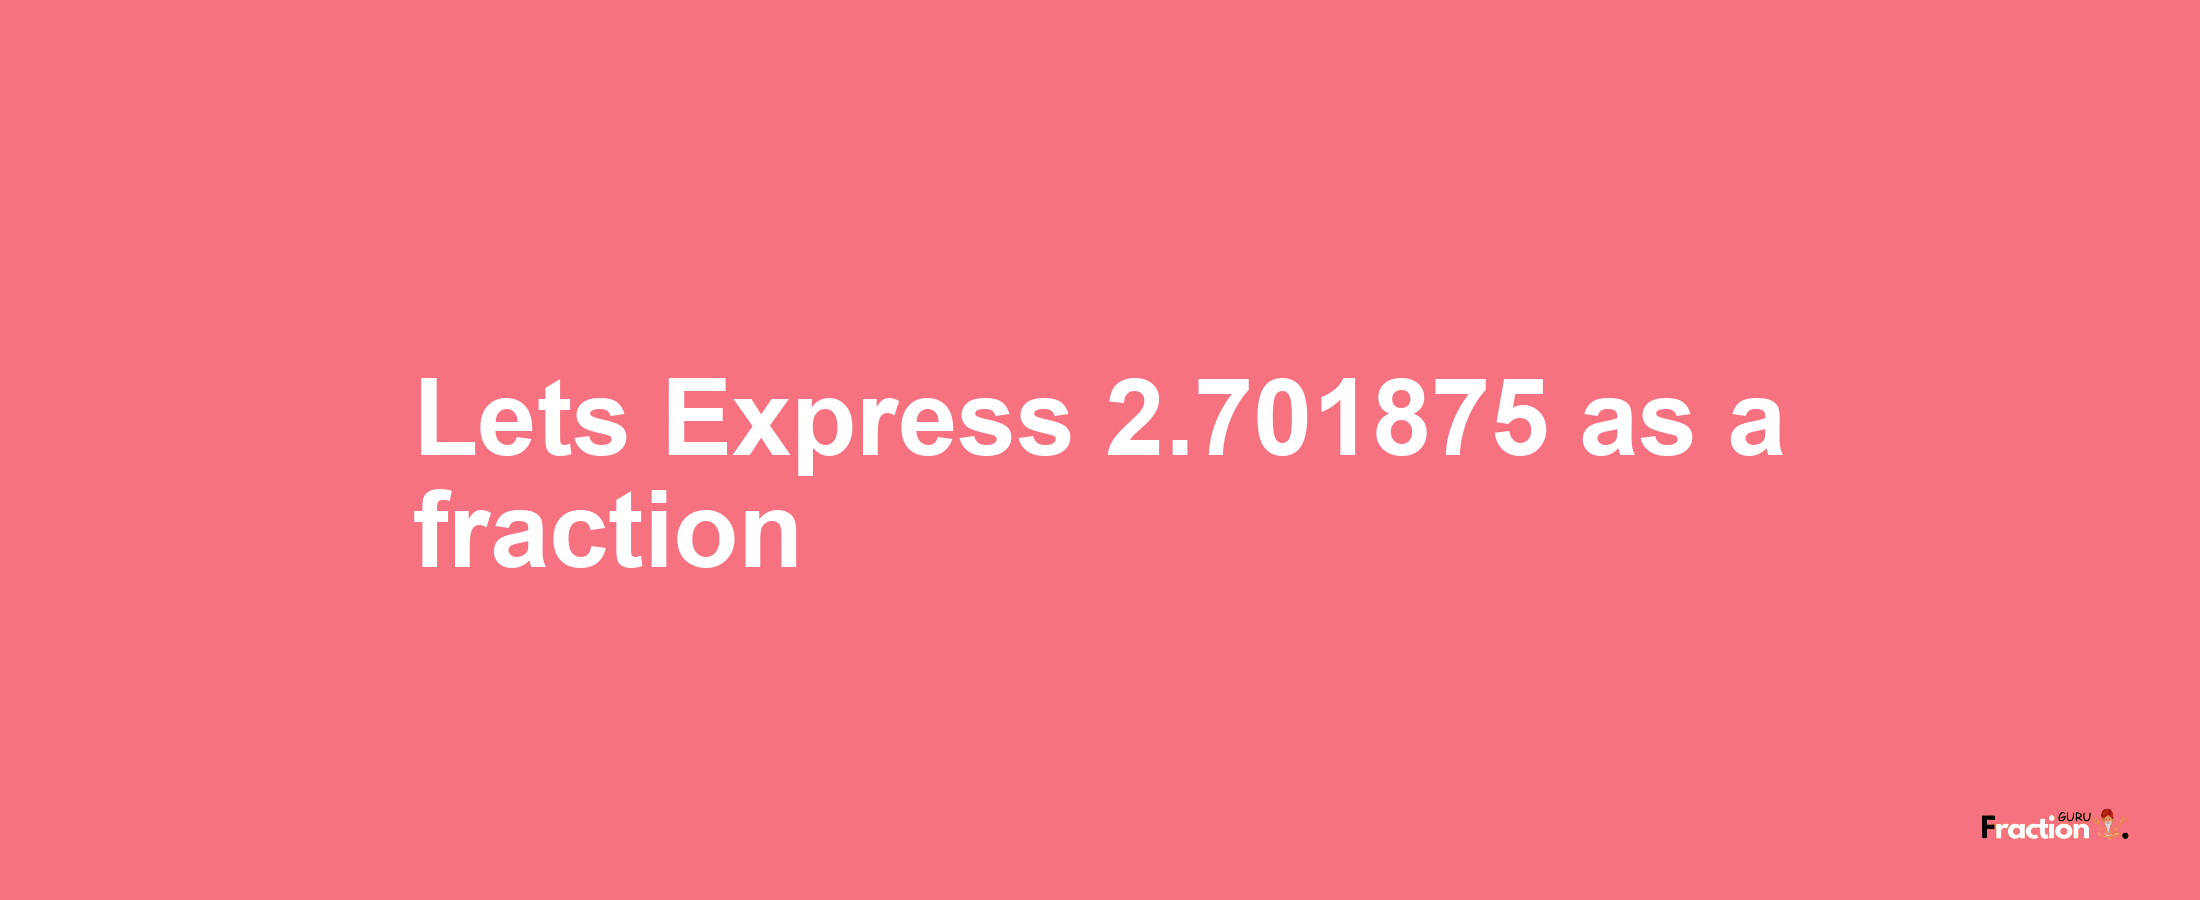 Lets Express 2.701875 as afraction